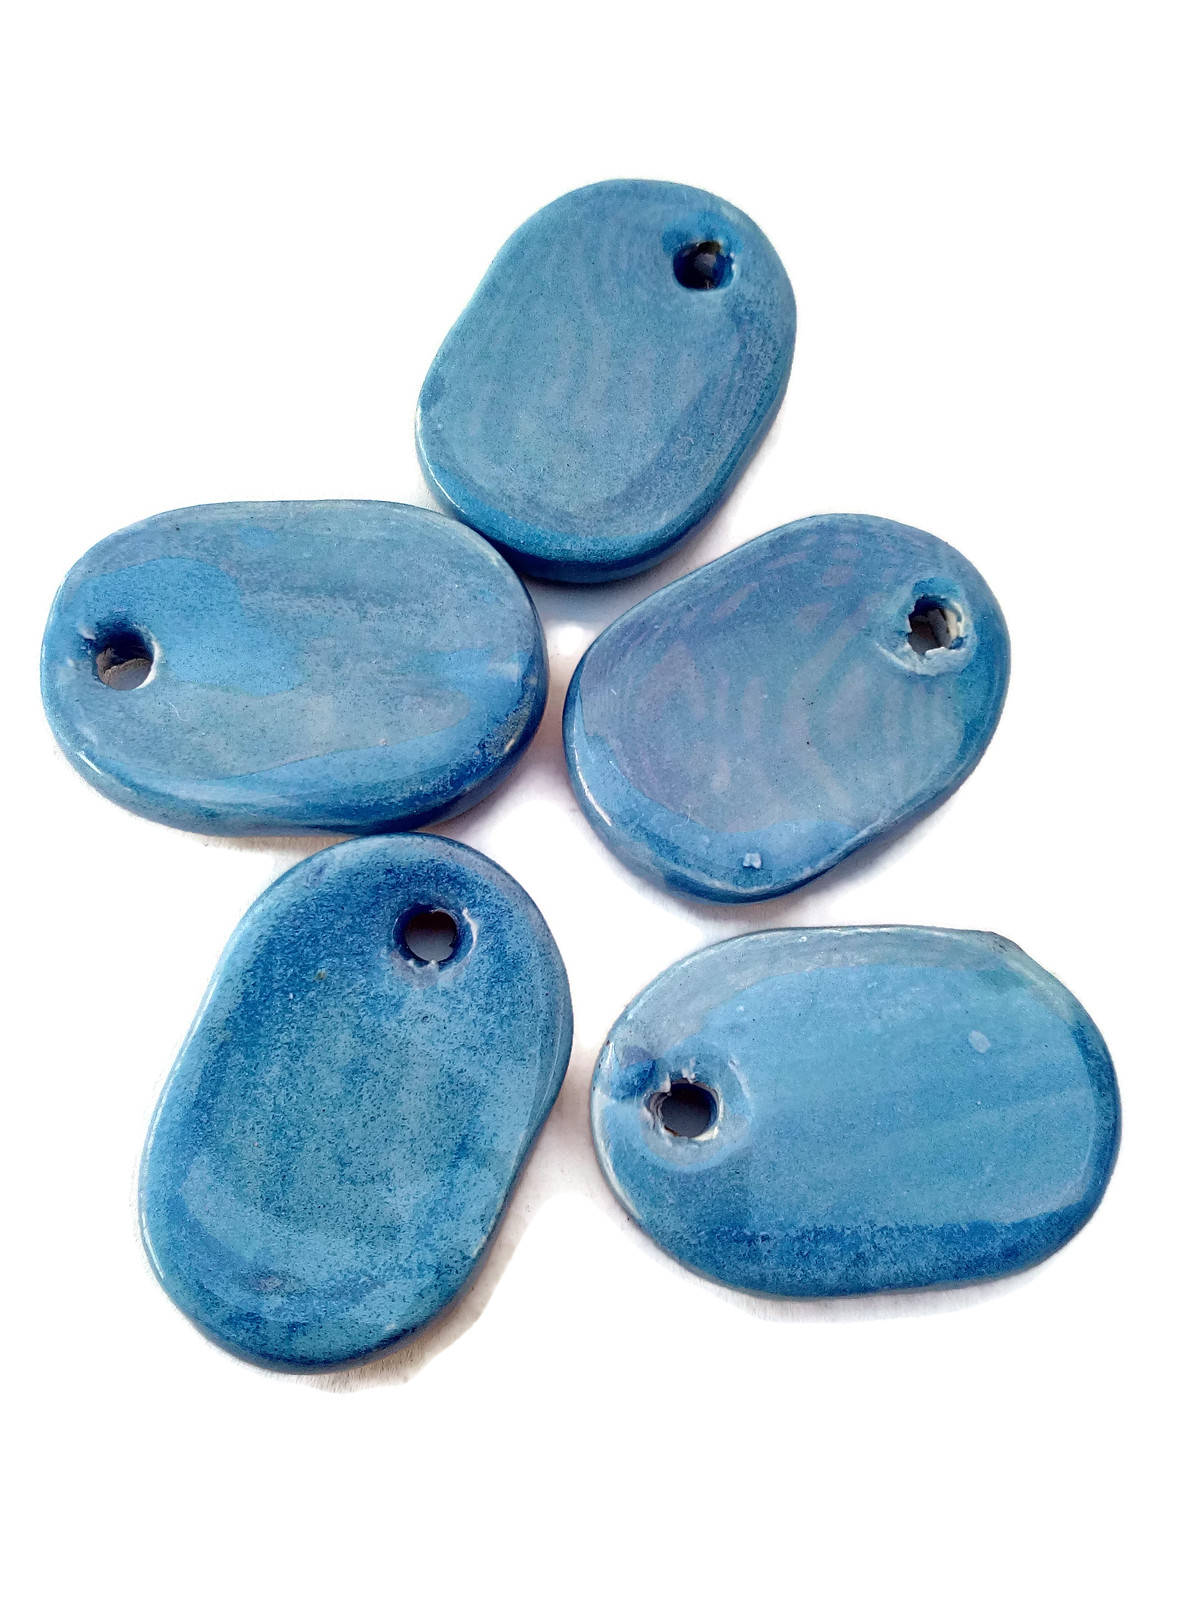 1Pc 30mm Handmade Ceramic Blue Modern Necklace Pendant For Jewelry Making, Oval Shaped Clay Charm For Eclectic Jewelry, Unique Gift For Mom - Ceramica Ana Rafael